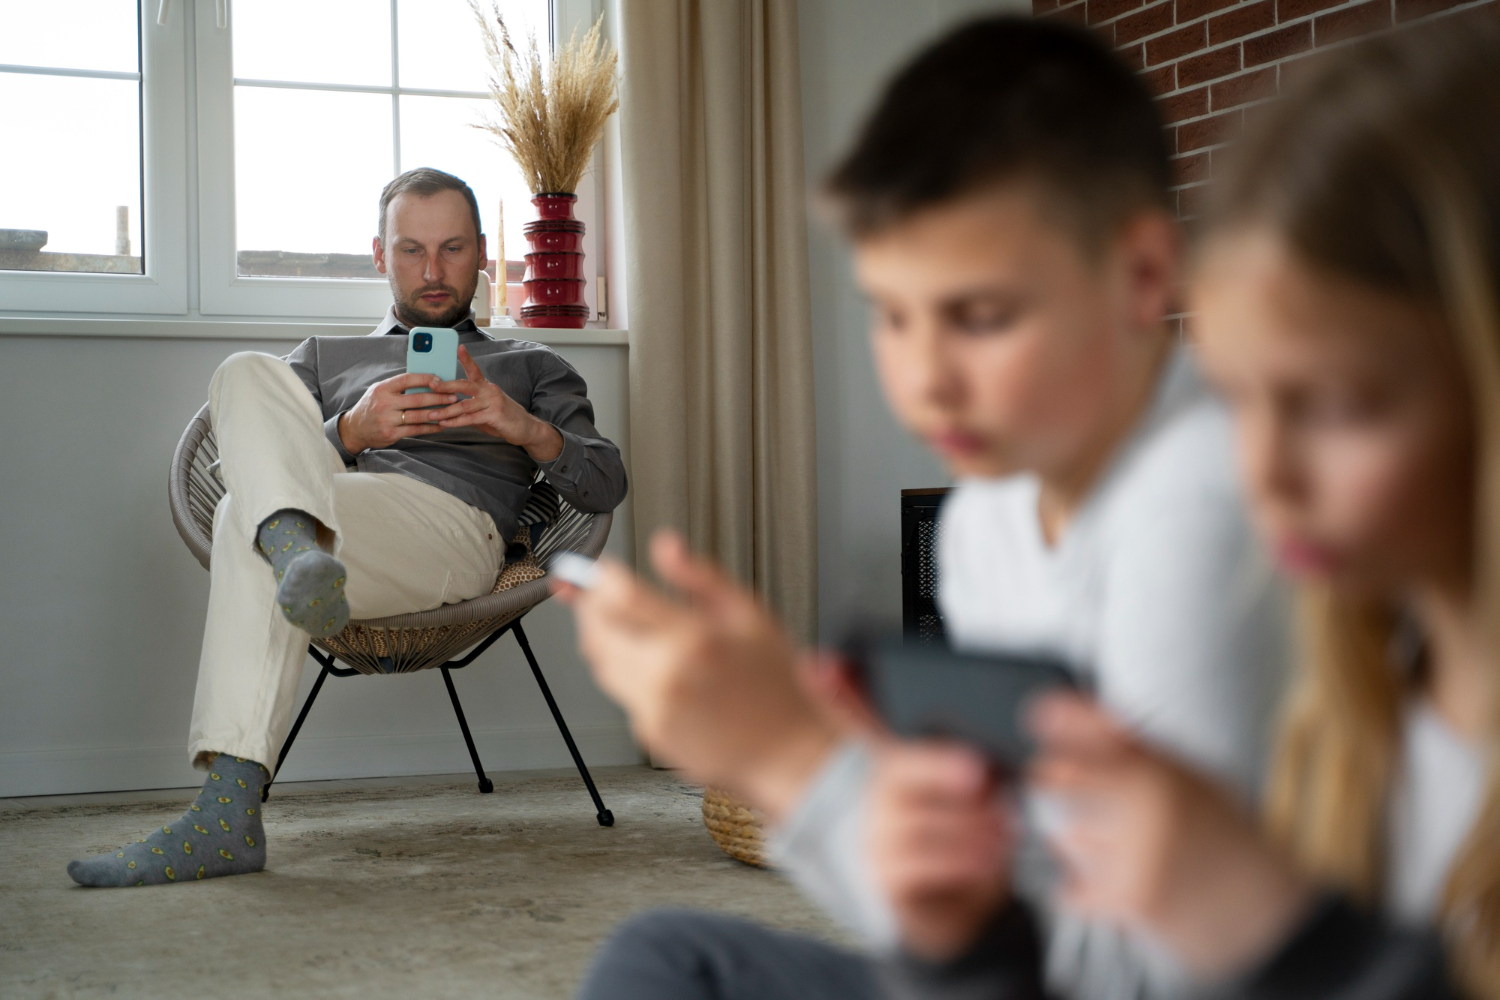 Tips for Parents to Combat Child Gambling